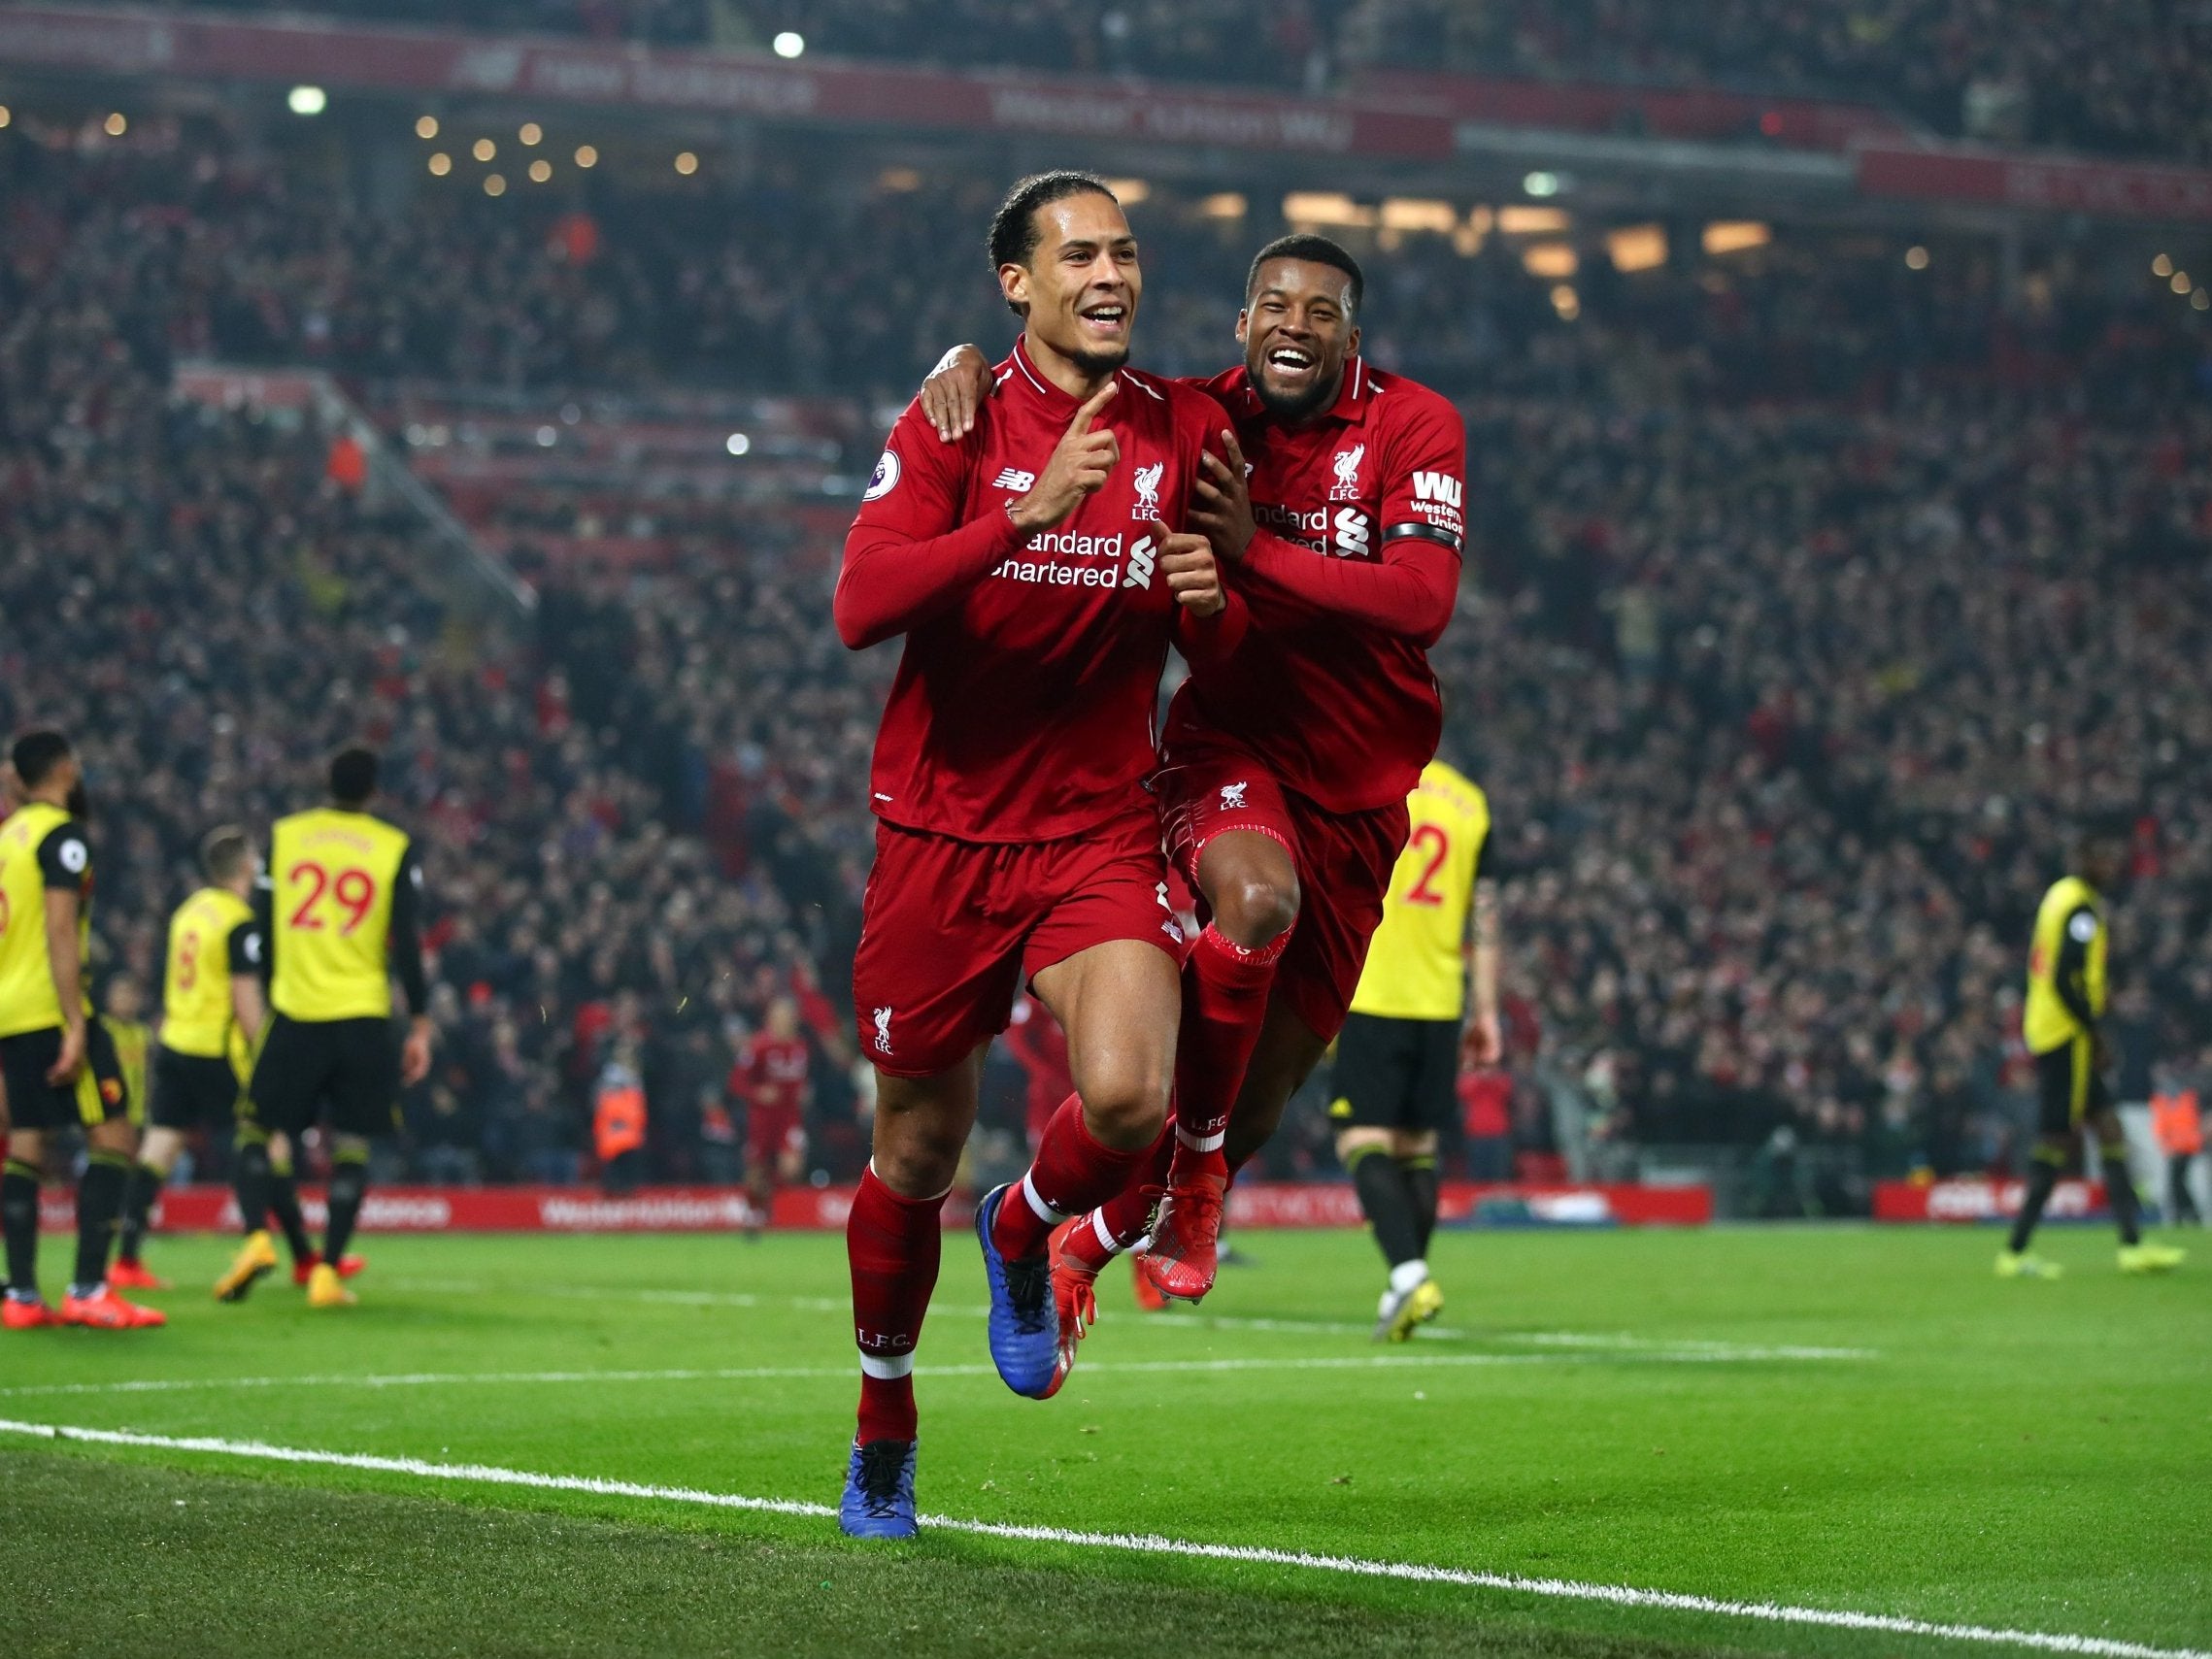 Liverpool romped past Watford in the indomitable fashion of earlier this season